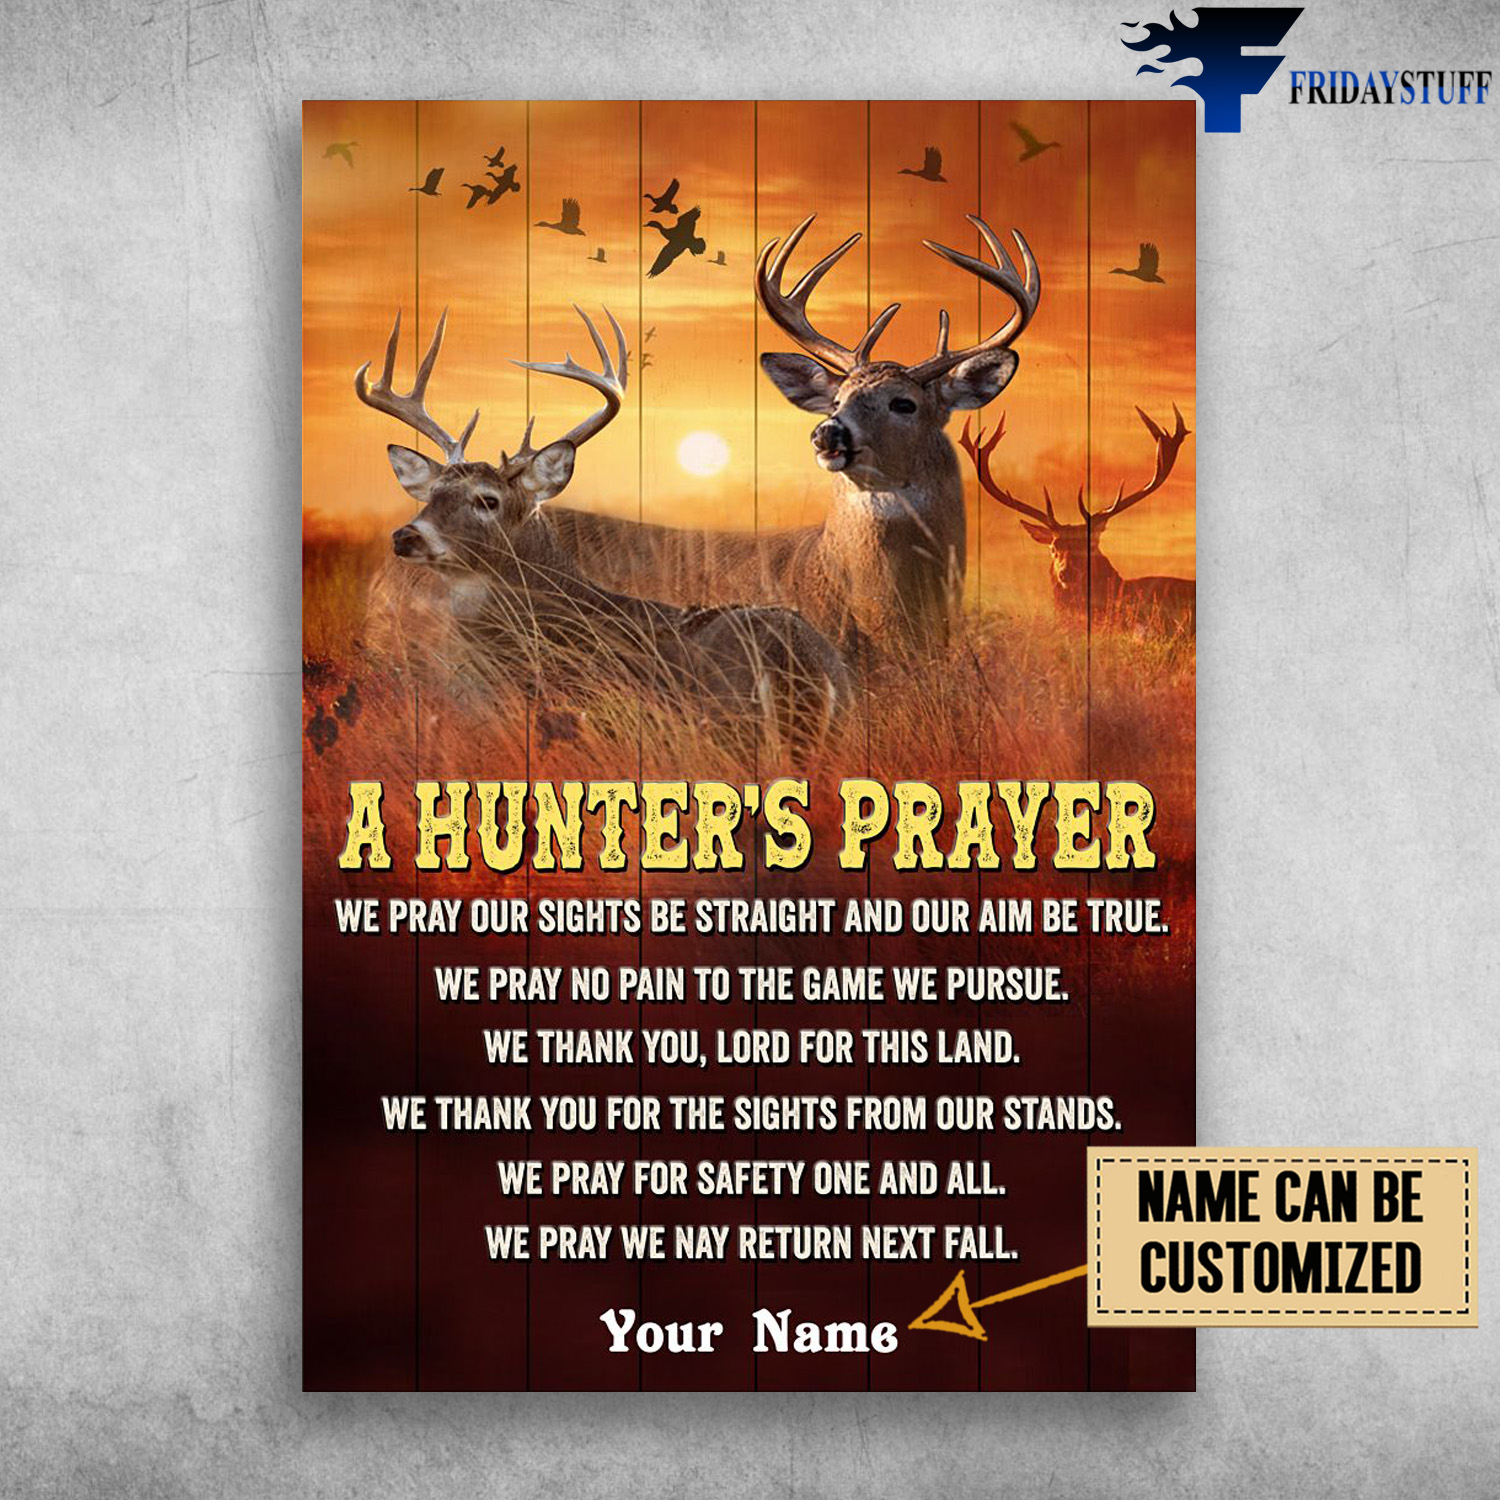 Deer Hunting, A Hunder's Prayer, We Pray Our Sights Be Straight, And Our Aim Be True, We Pray No Pain To The Game We Pursue, We Thank You, Lord For This Land